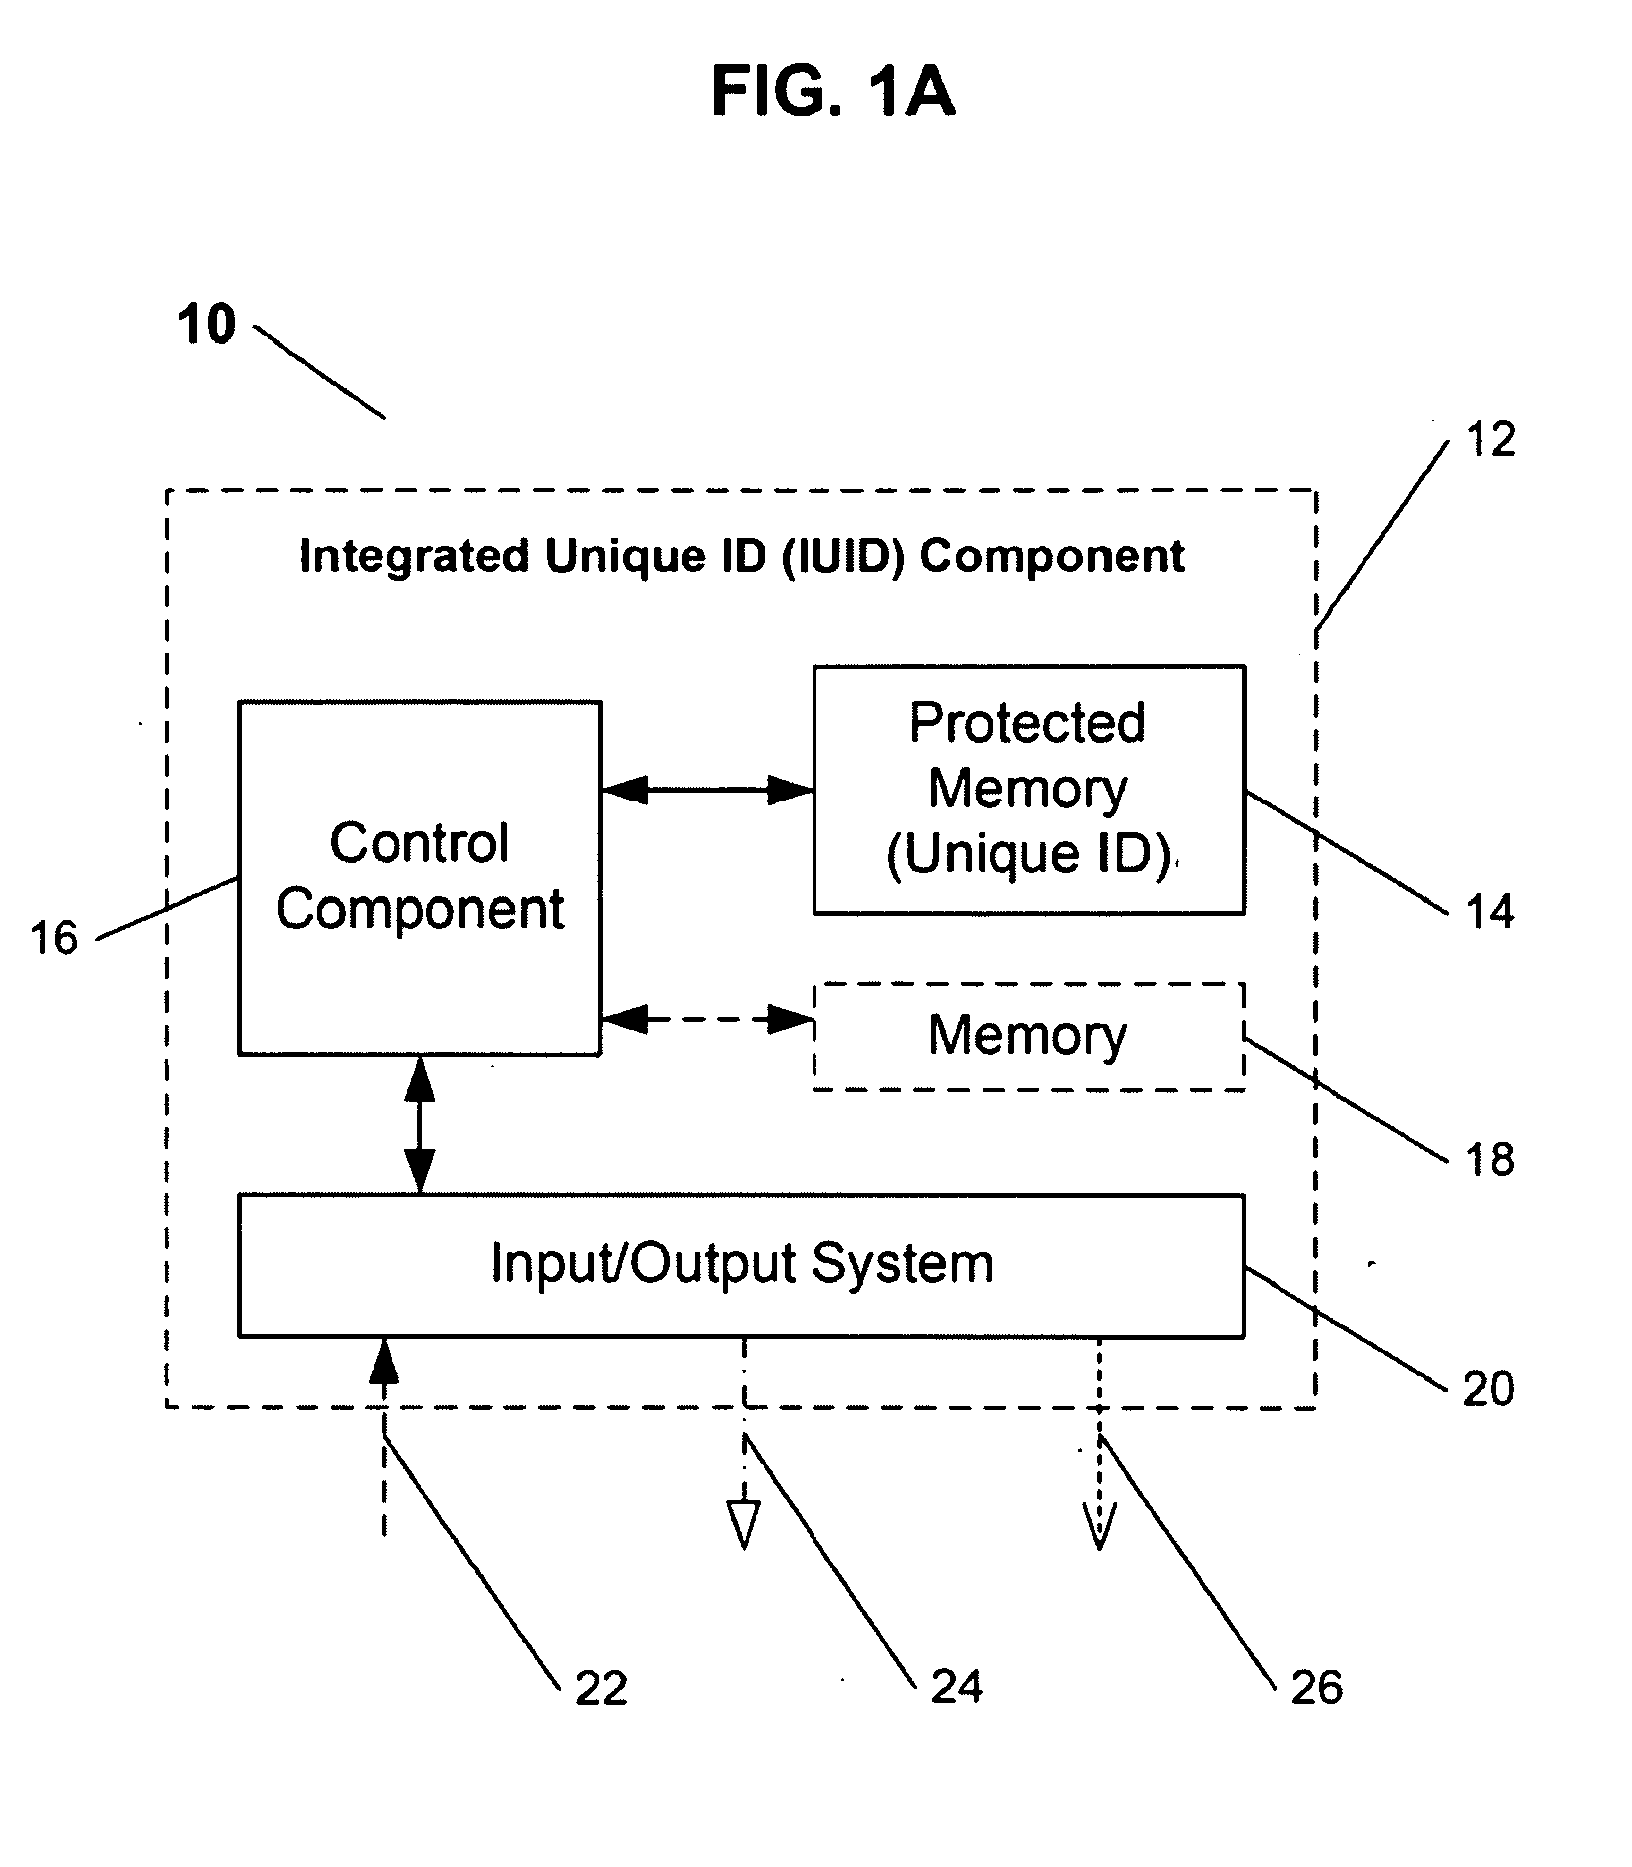 System and method for streamlined registration of electronic products over a communication network and for verification and management of information related thereto